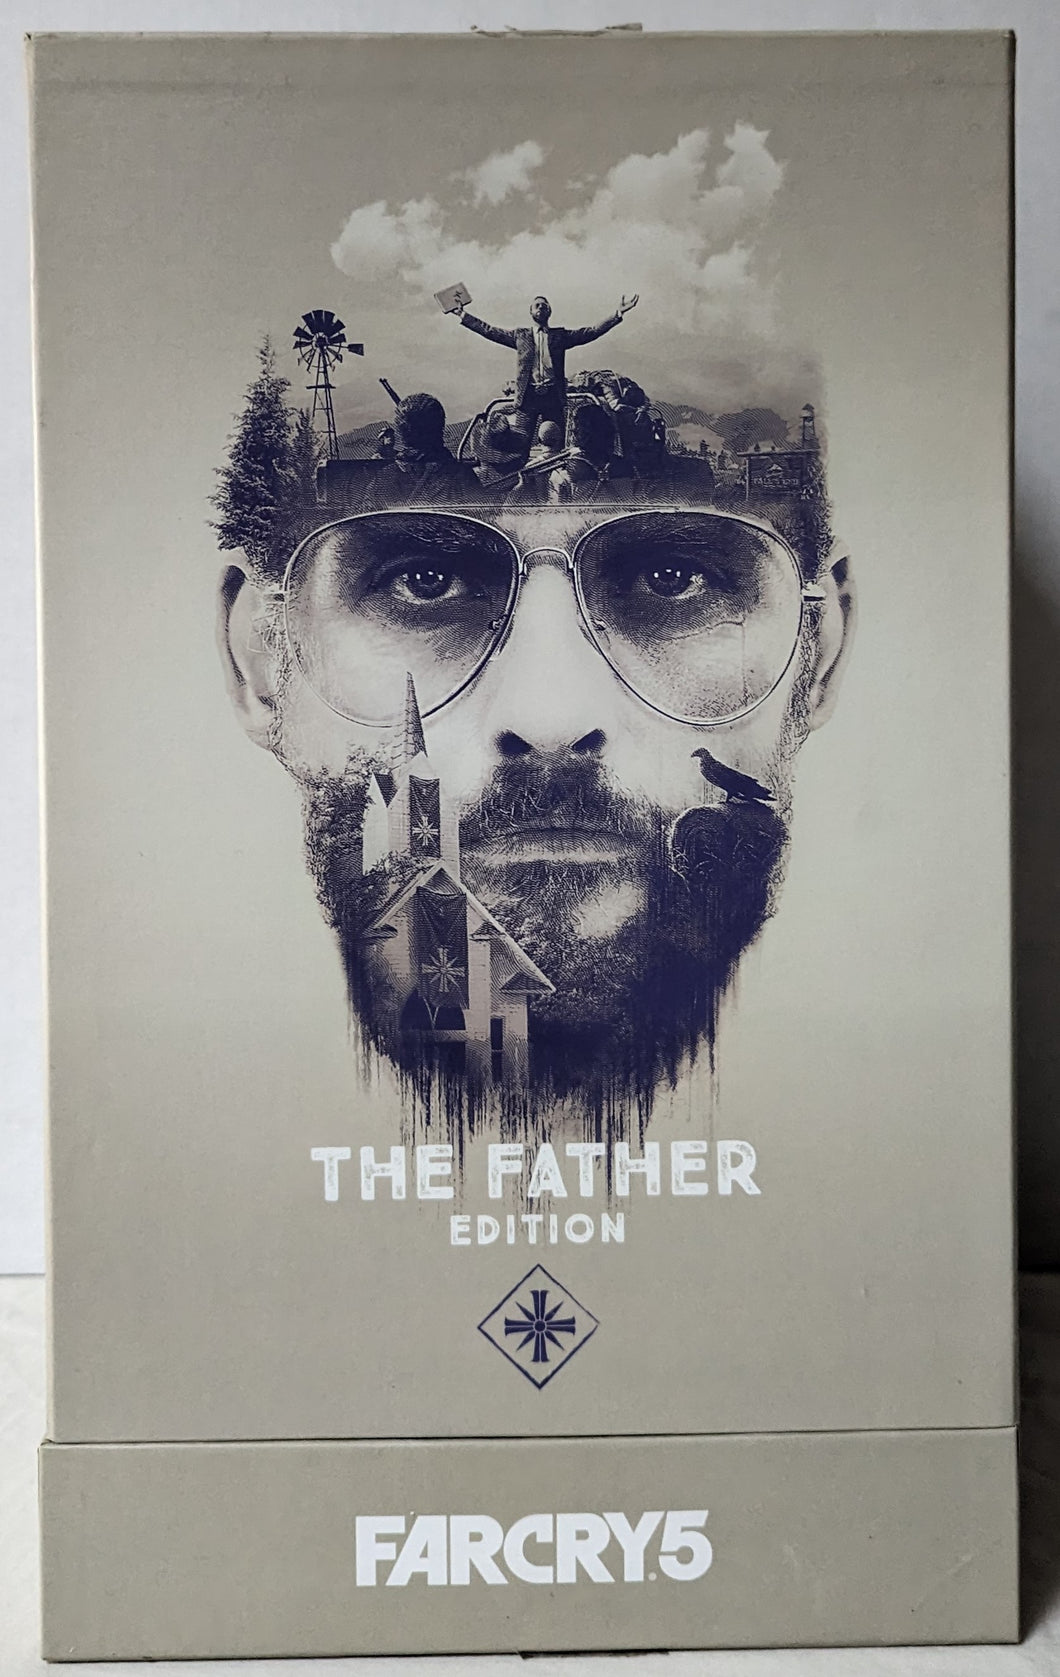 Ubisoft Farcry 5 The Father Collectors Edition Statue